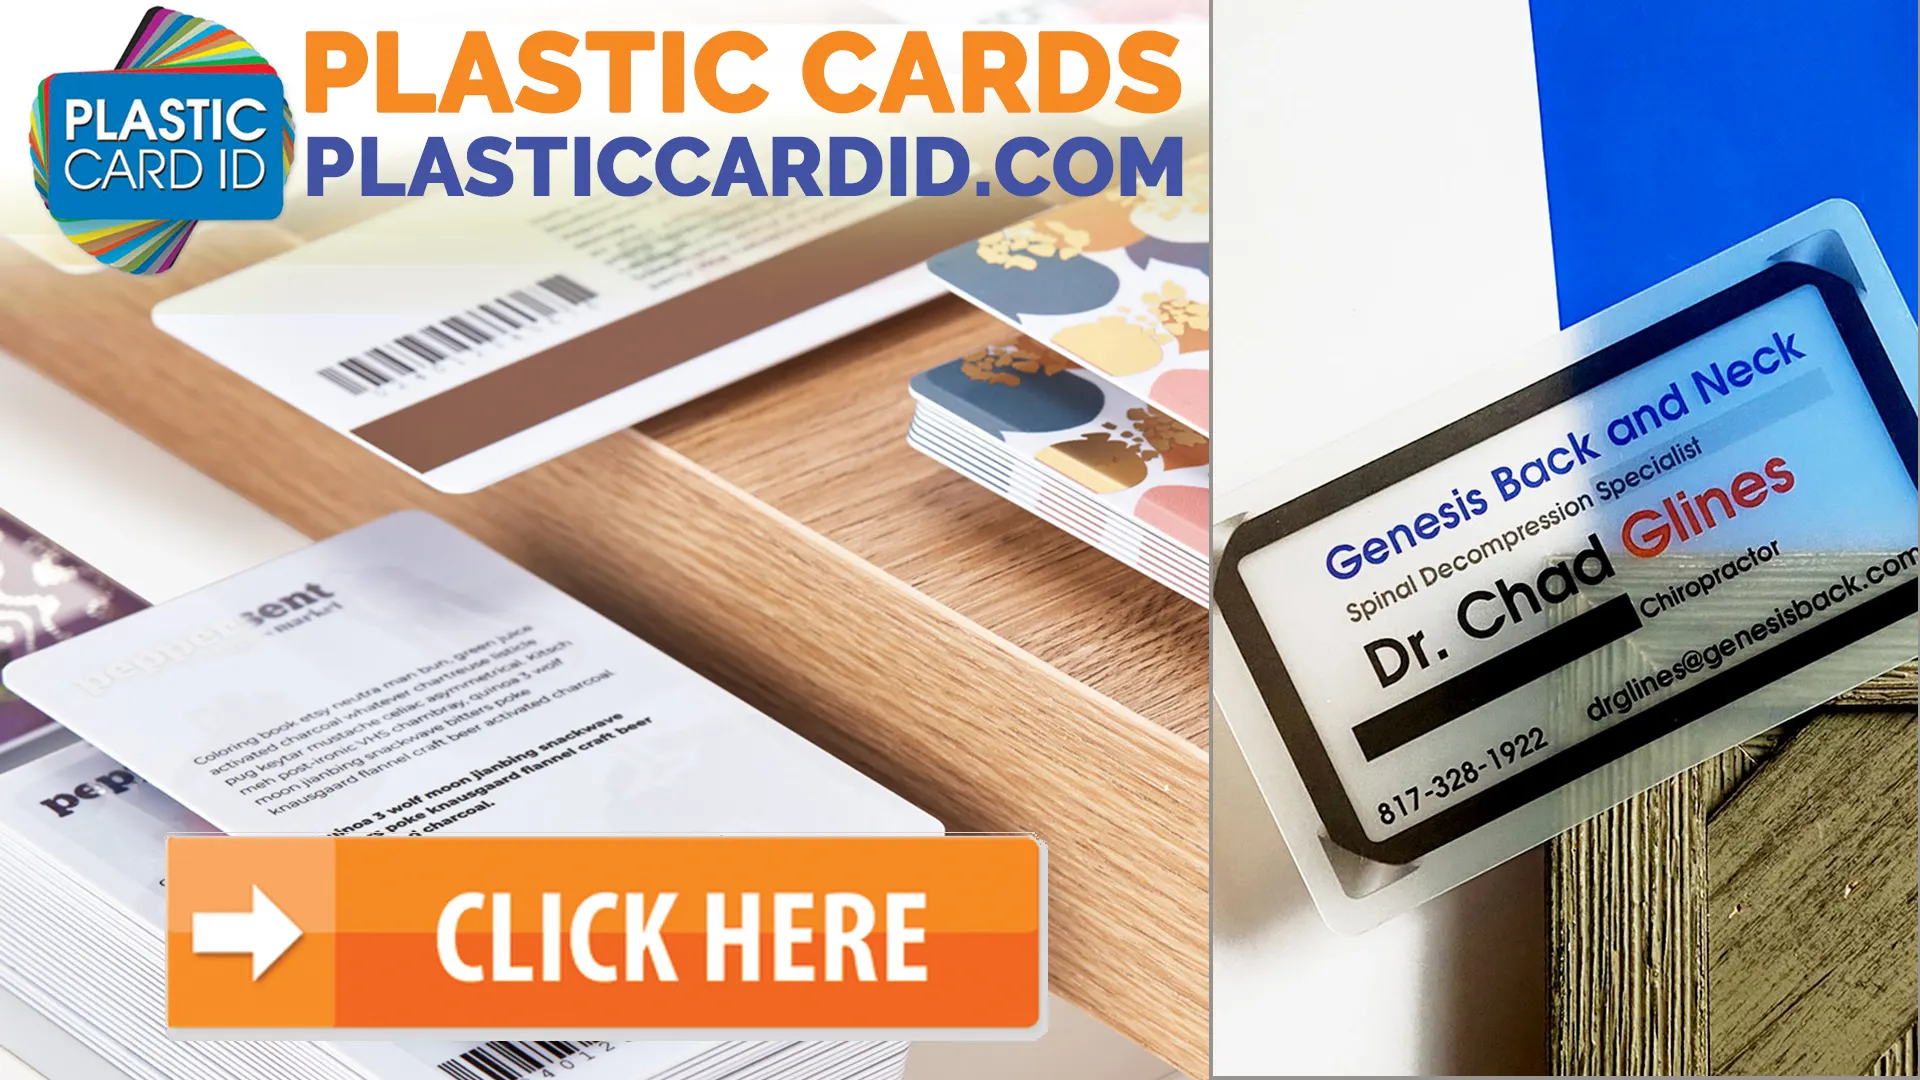 Card Types and Functionalities: Covered by Plastic Card ID




